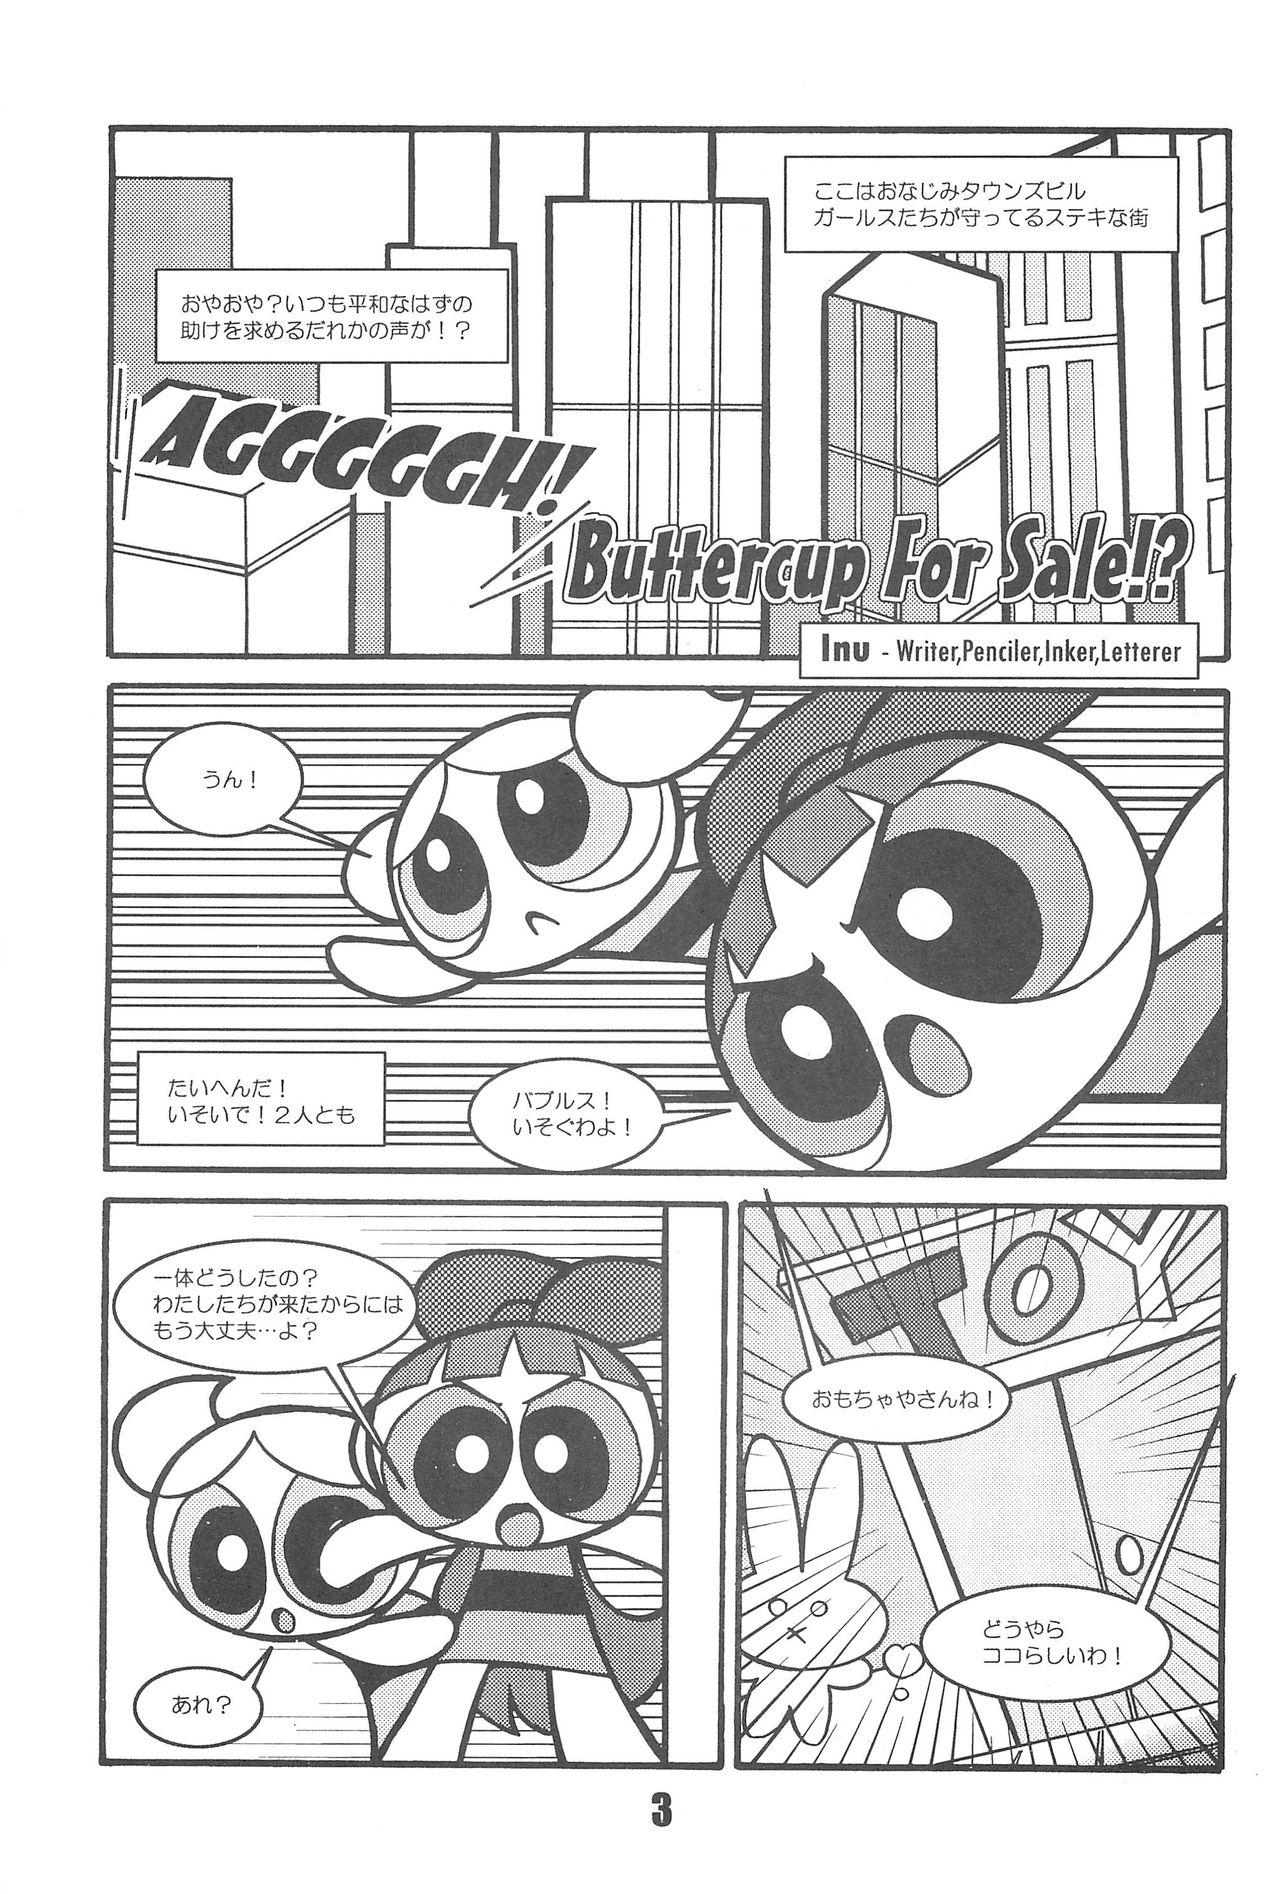 Bhabi Show Goes On! Funhouse 22th - The powerpuff girls Chibola - Page 3